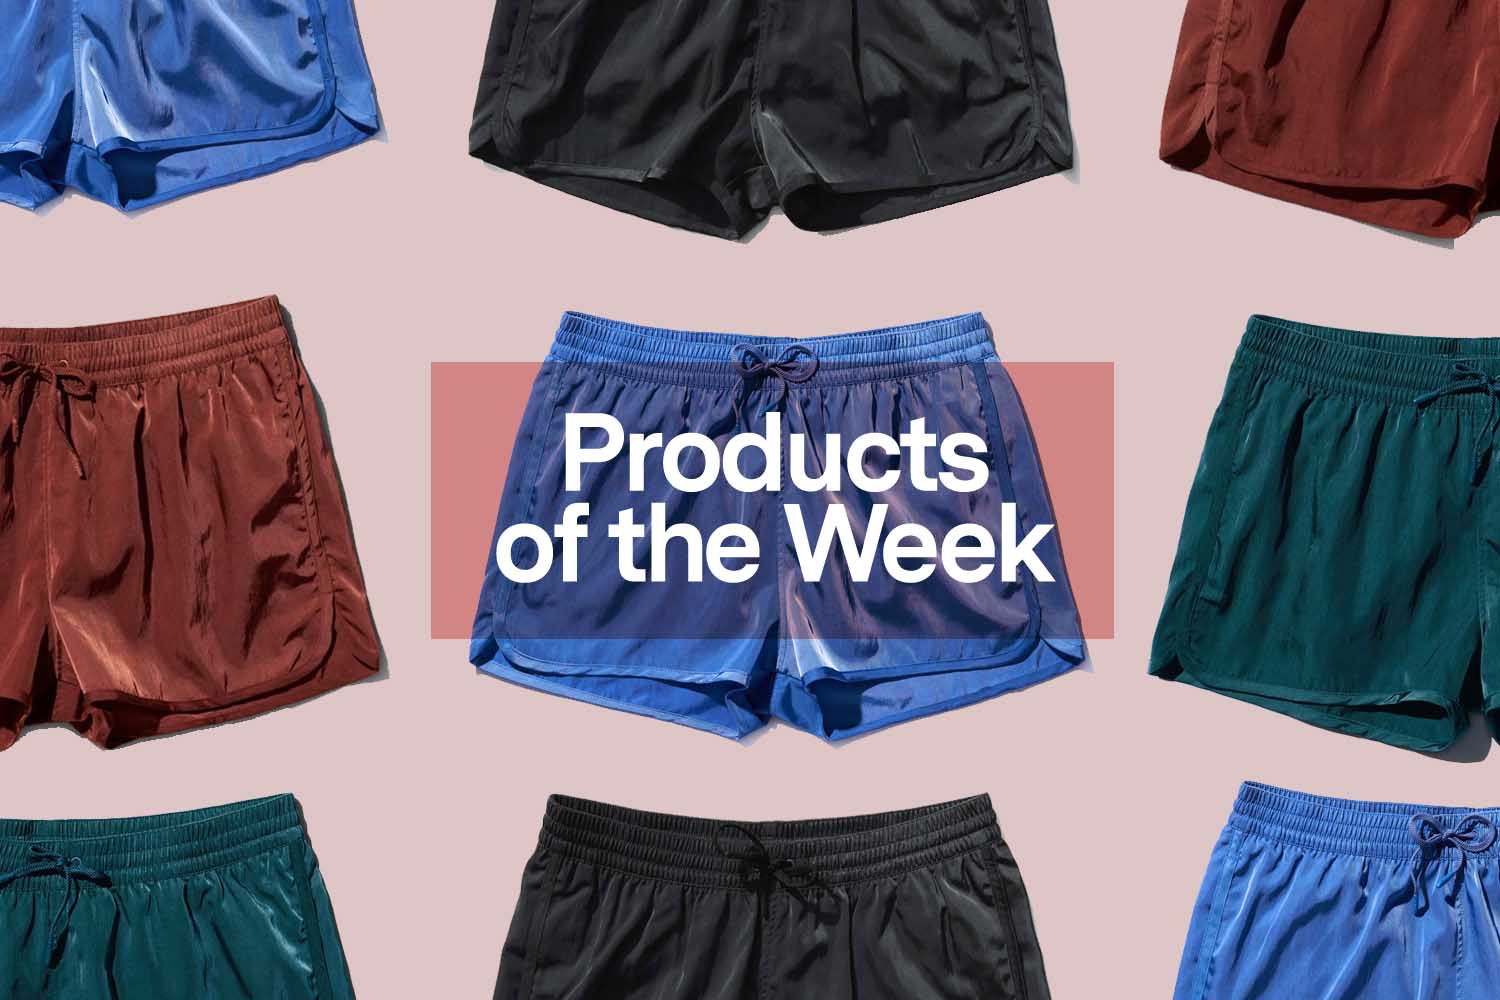 The text "Products of the Week" overlaid over a selection of CDLP Swim Shorts